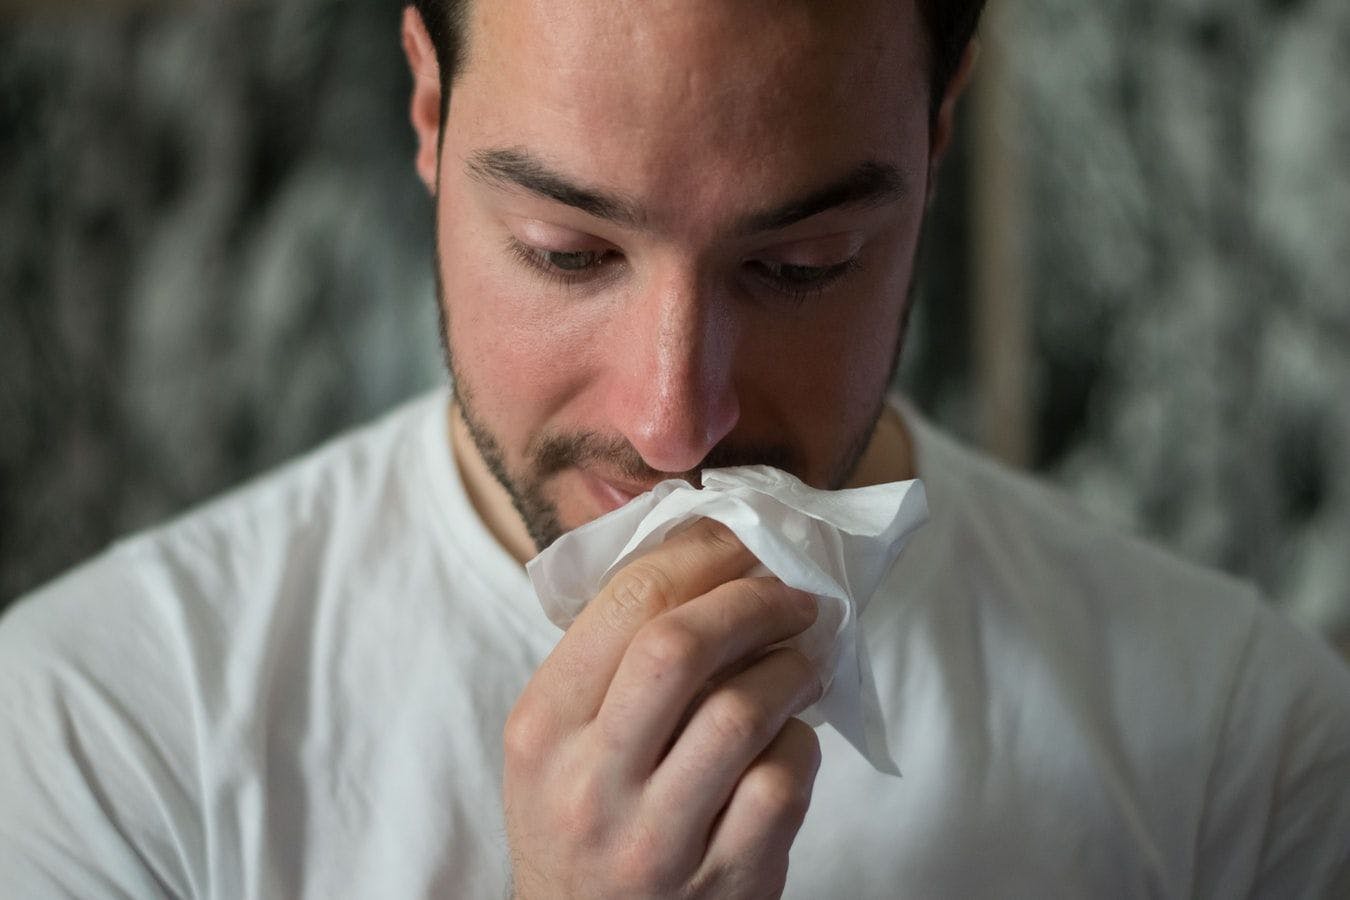 Study: Uncontrolled Allergic Rhinitis Largely Driven by Disease in Patients